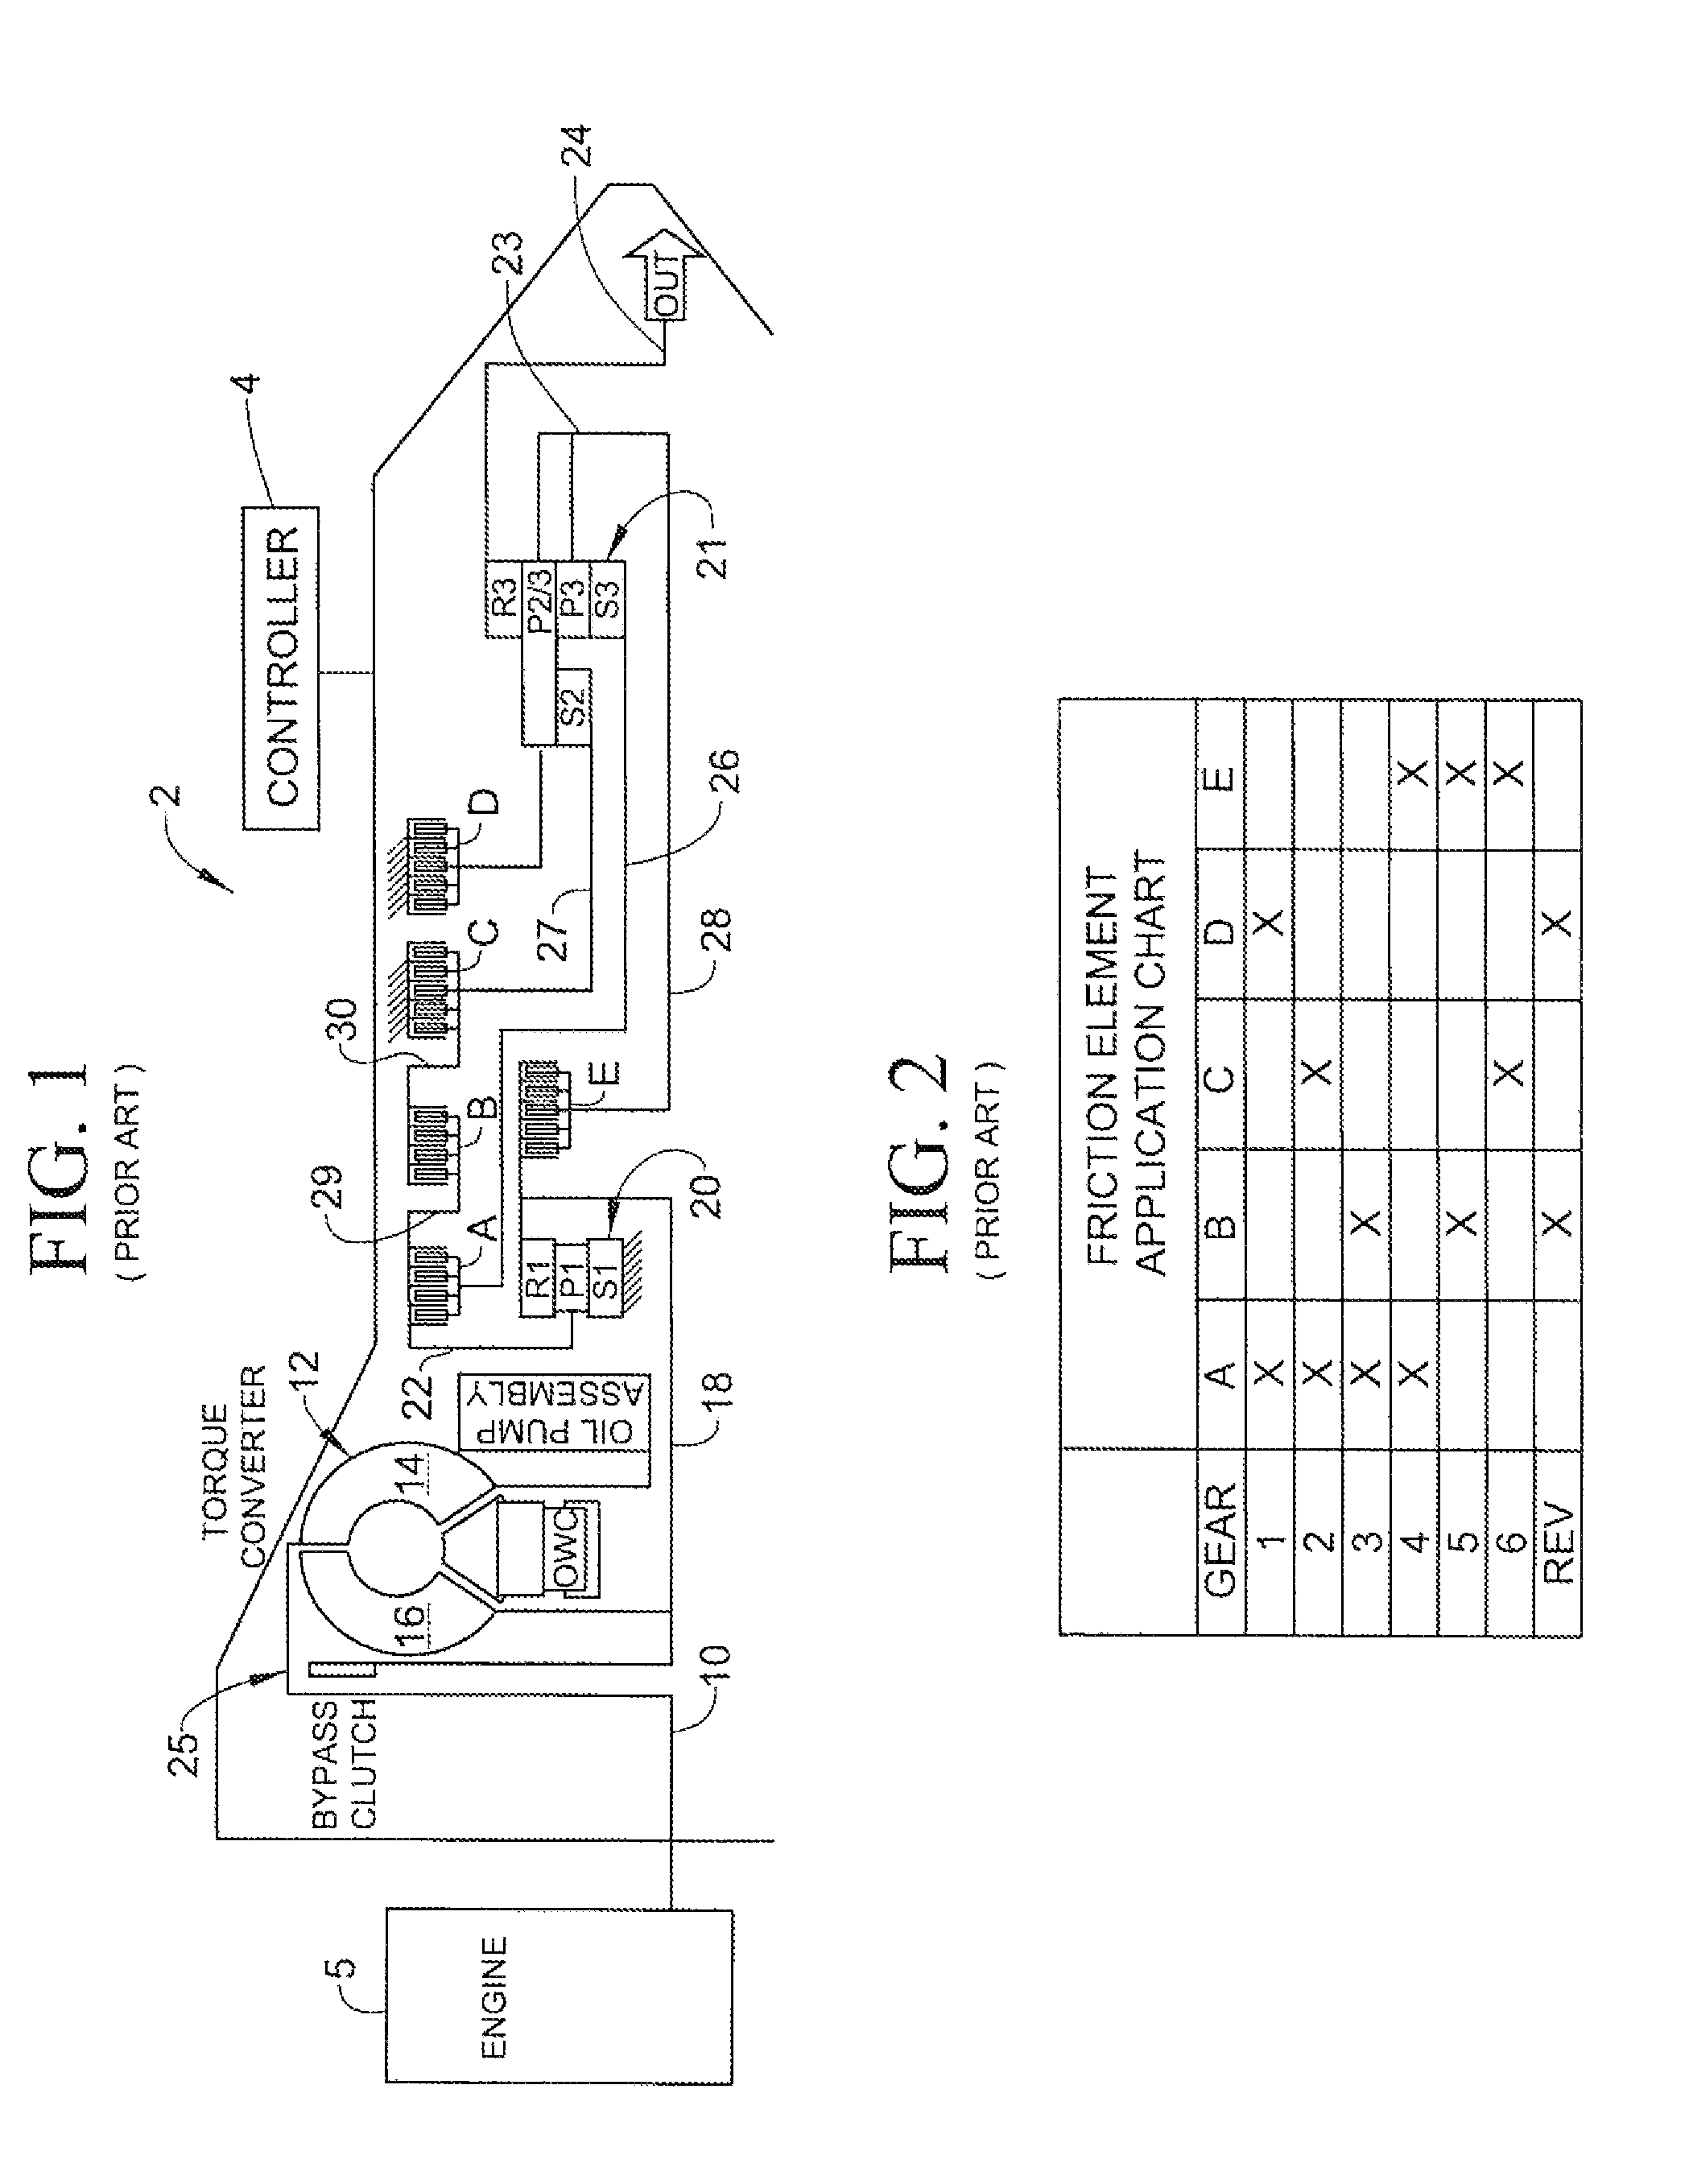 Closed-loop torque phase control for shifting automatic transmission gear ratios based on friction element load sensing